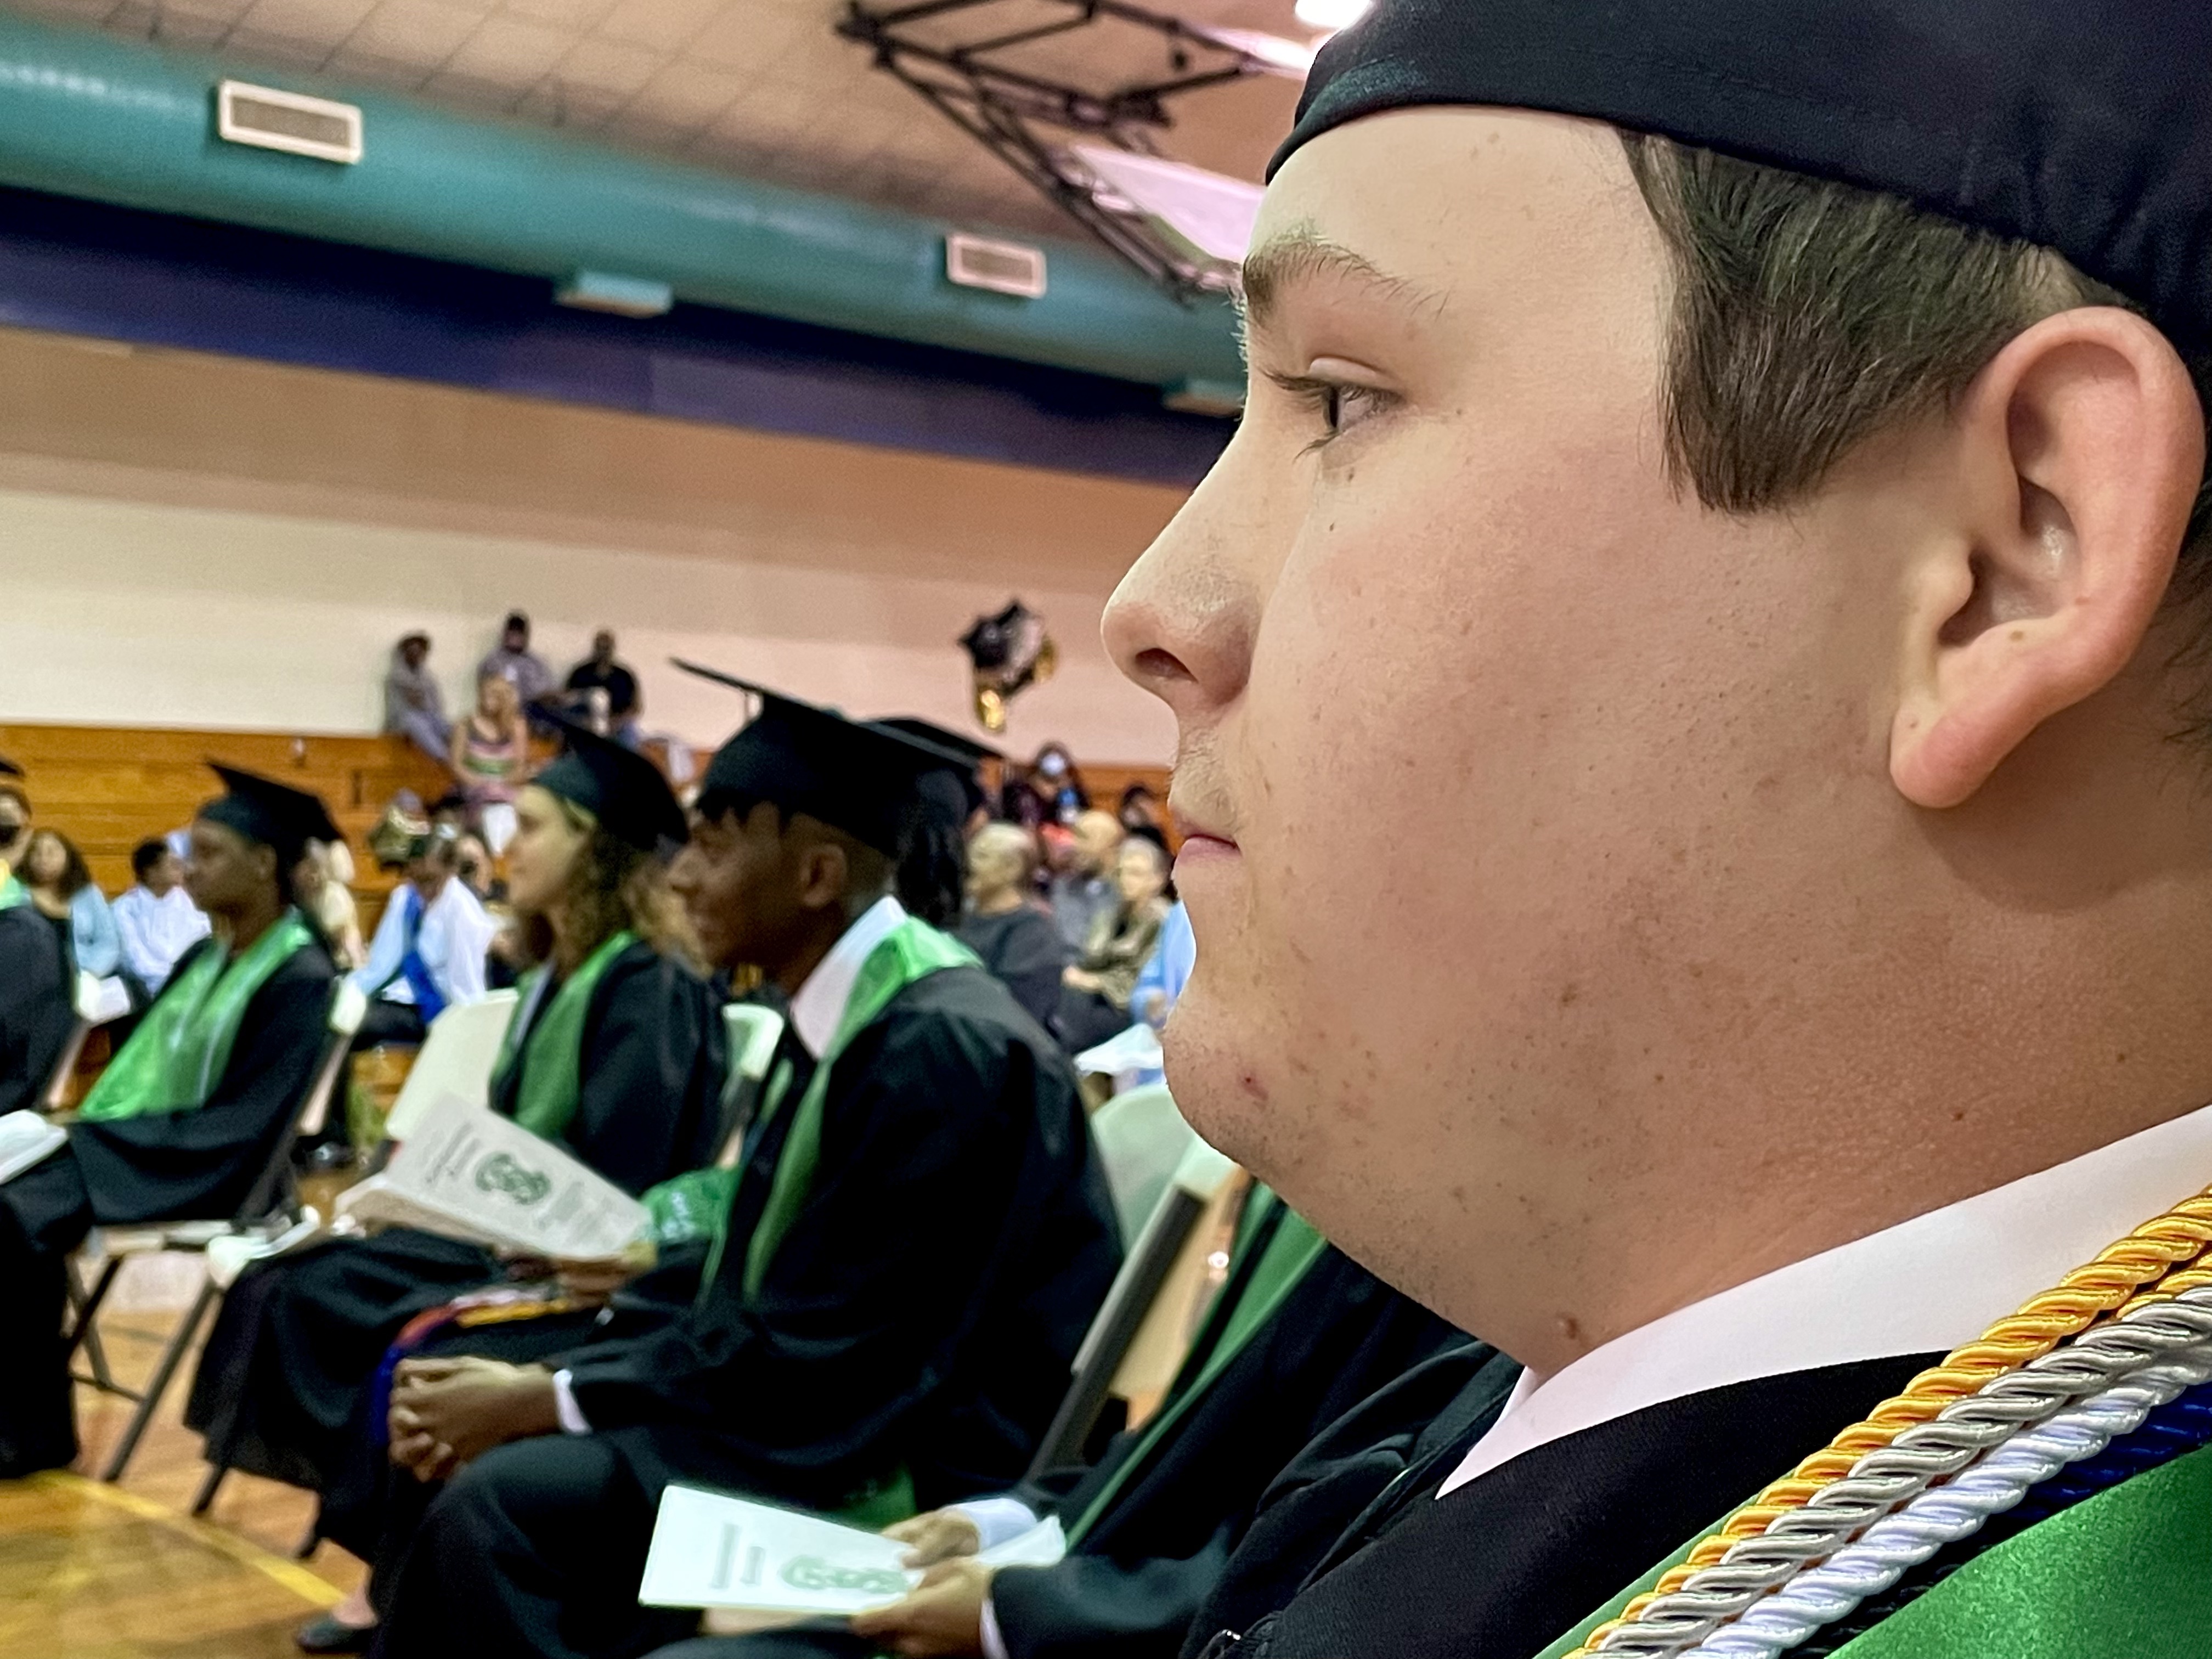 graduate wearing a cap with other graduates in the background